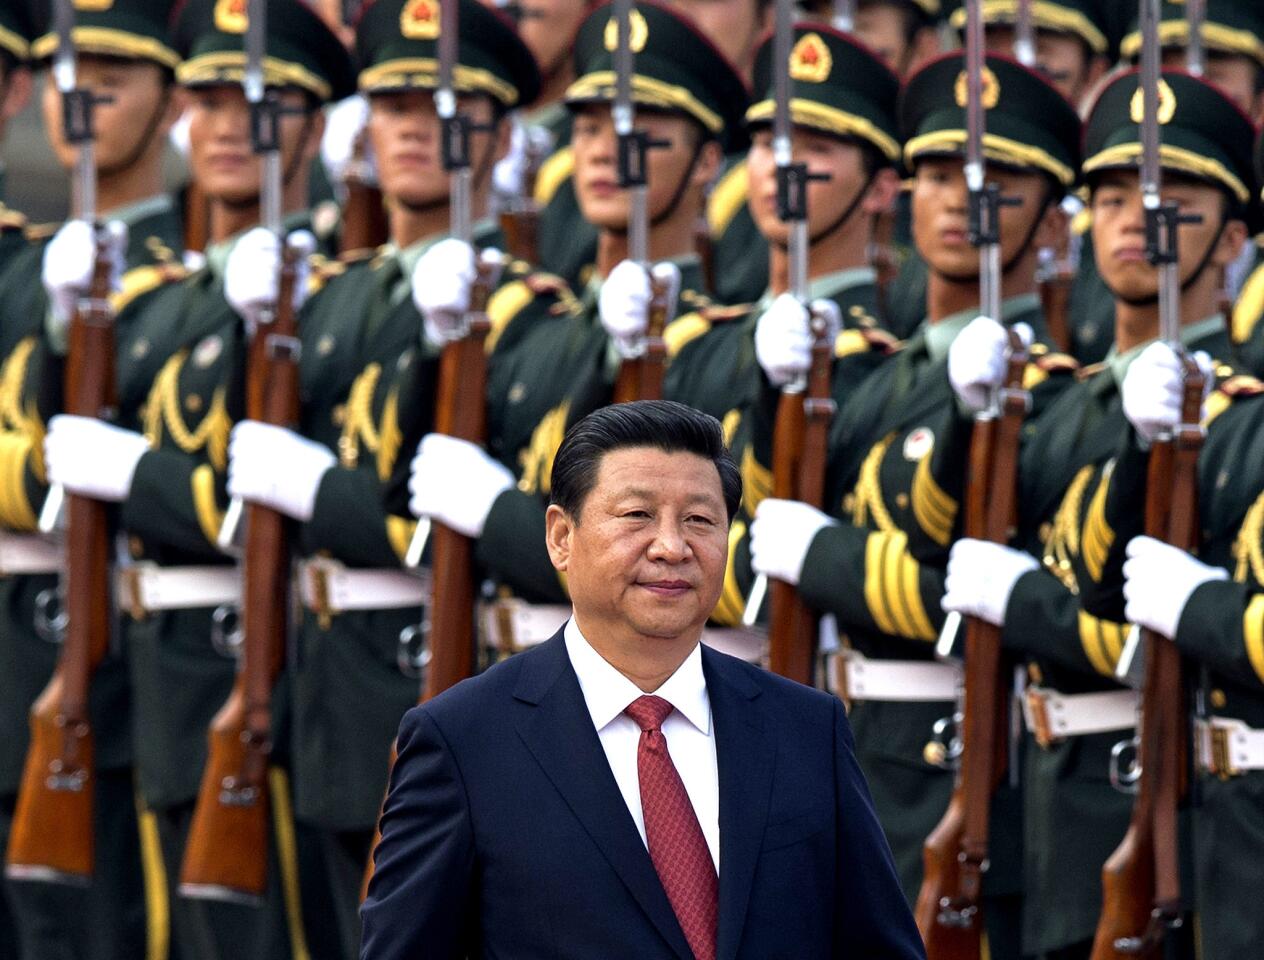 Chinese President Xi Jinping inspects an honor guard outside the Great Hall of the People in Beijing. China's plan to create a new security committee points to Xi's effort to cement his authority as Communist Party leader, analysts said in November.